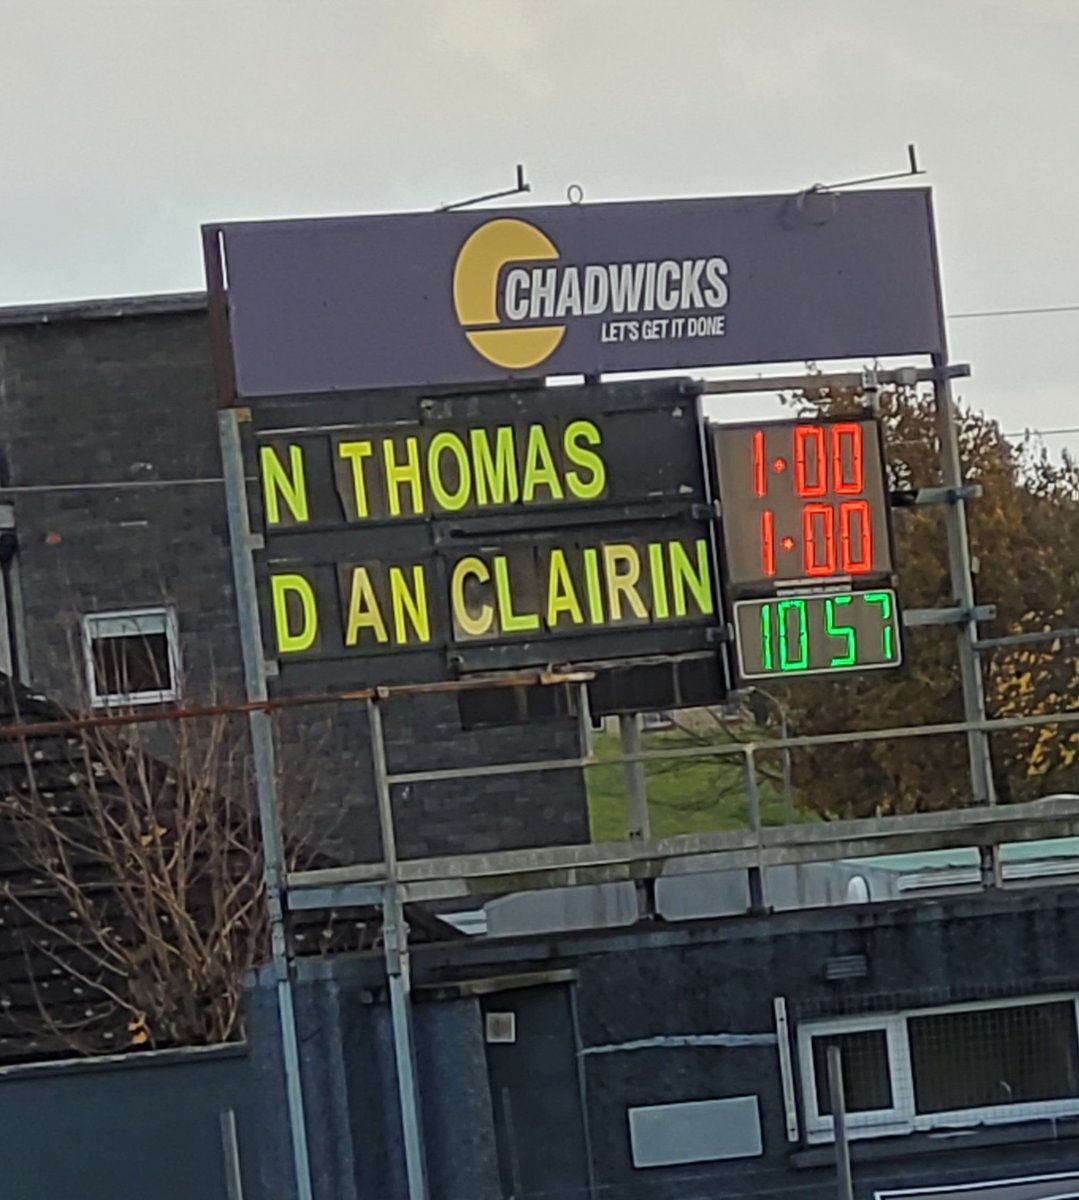 Thomas’s strike back with a goal of their own